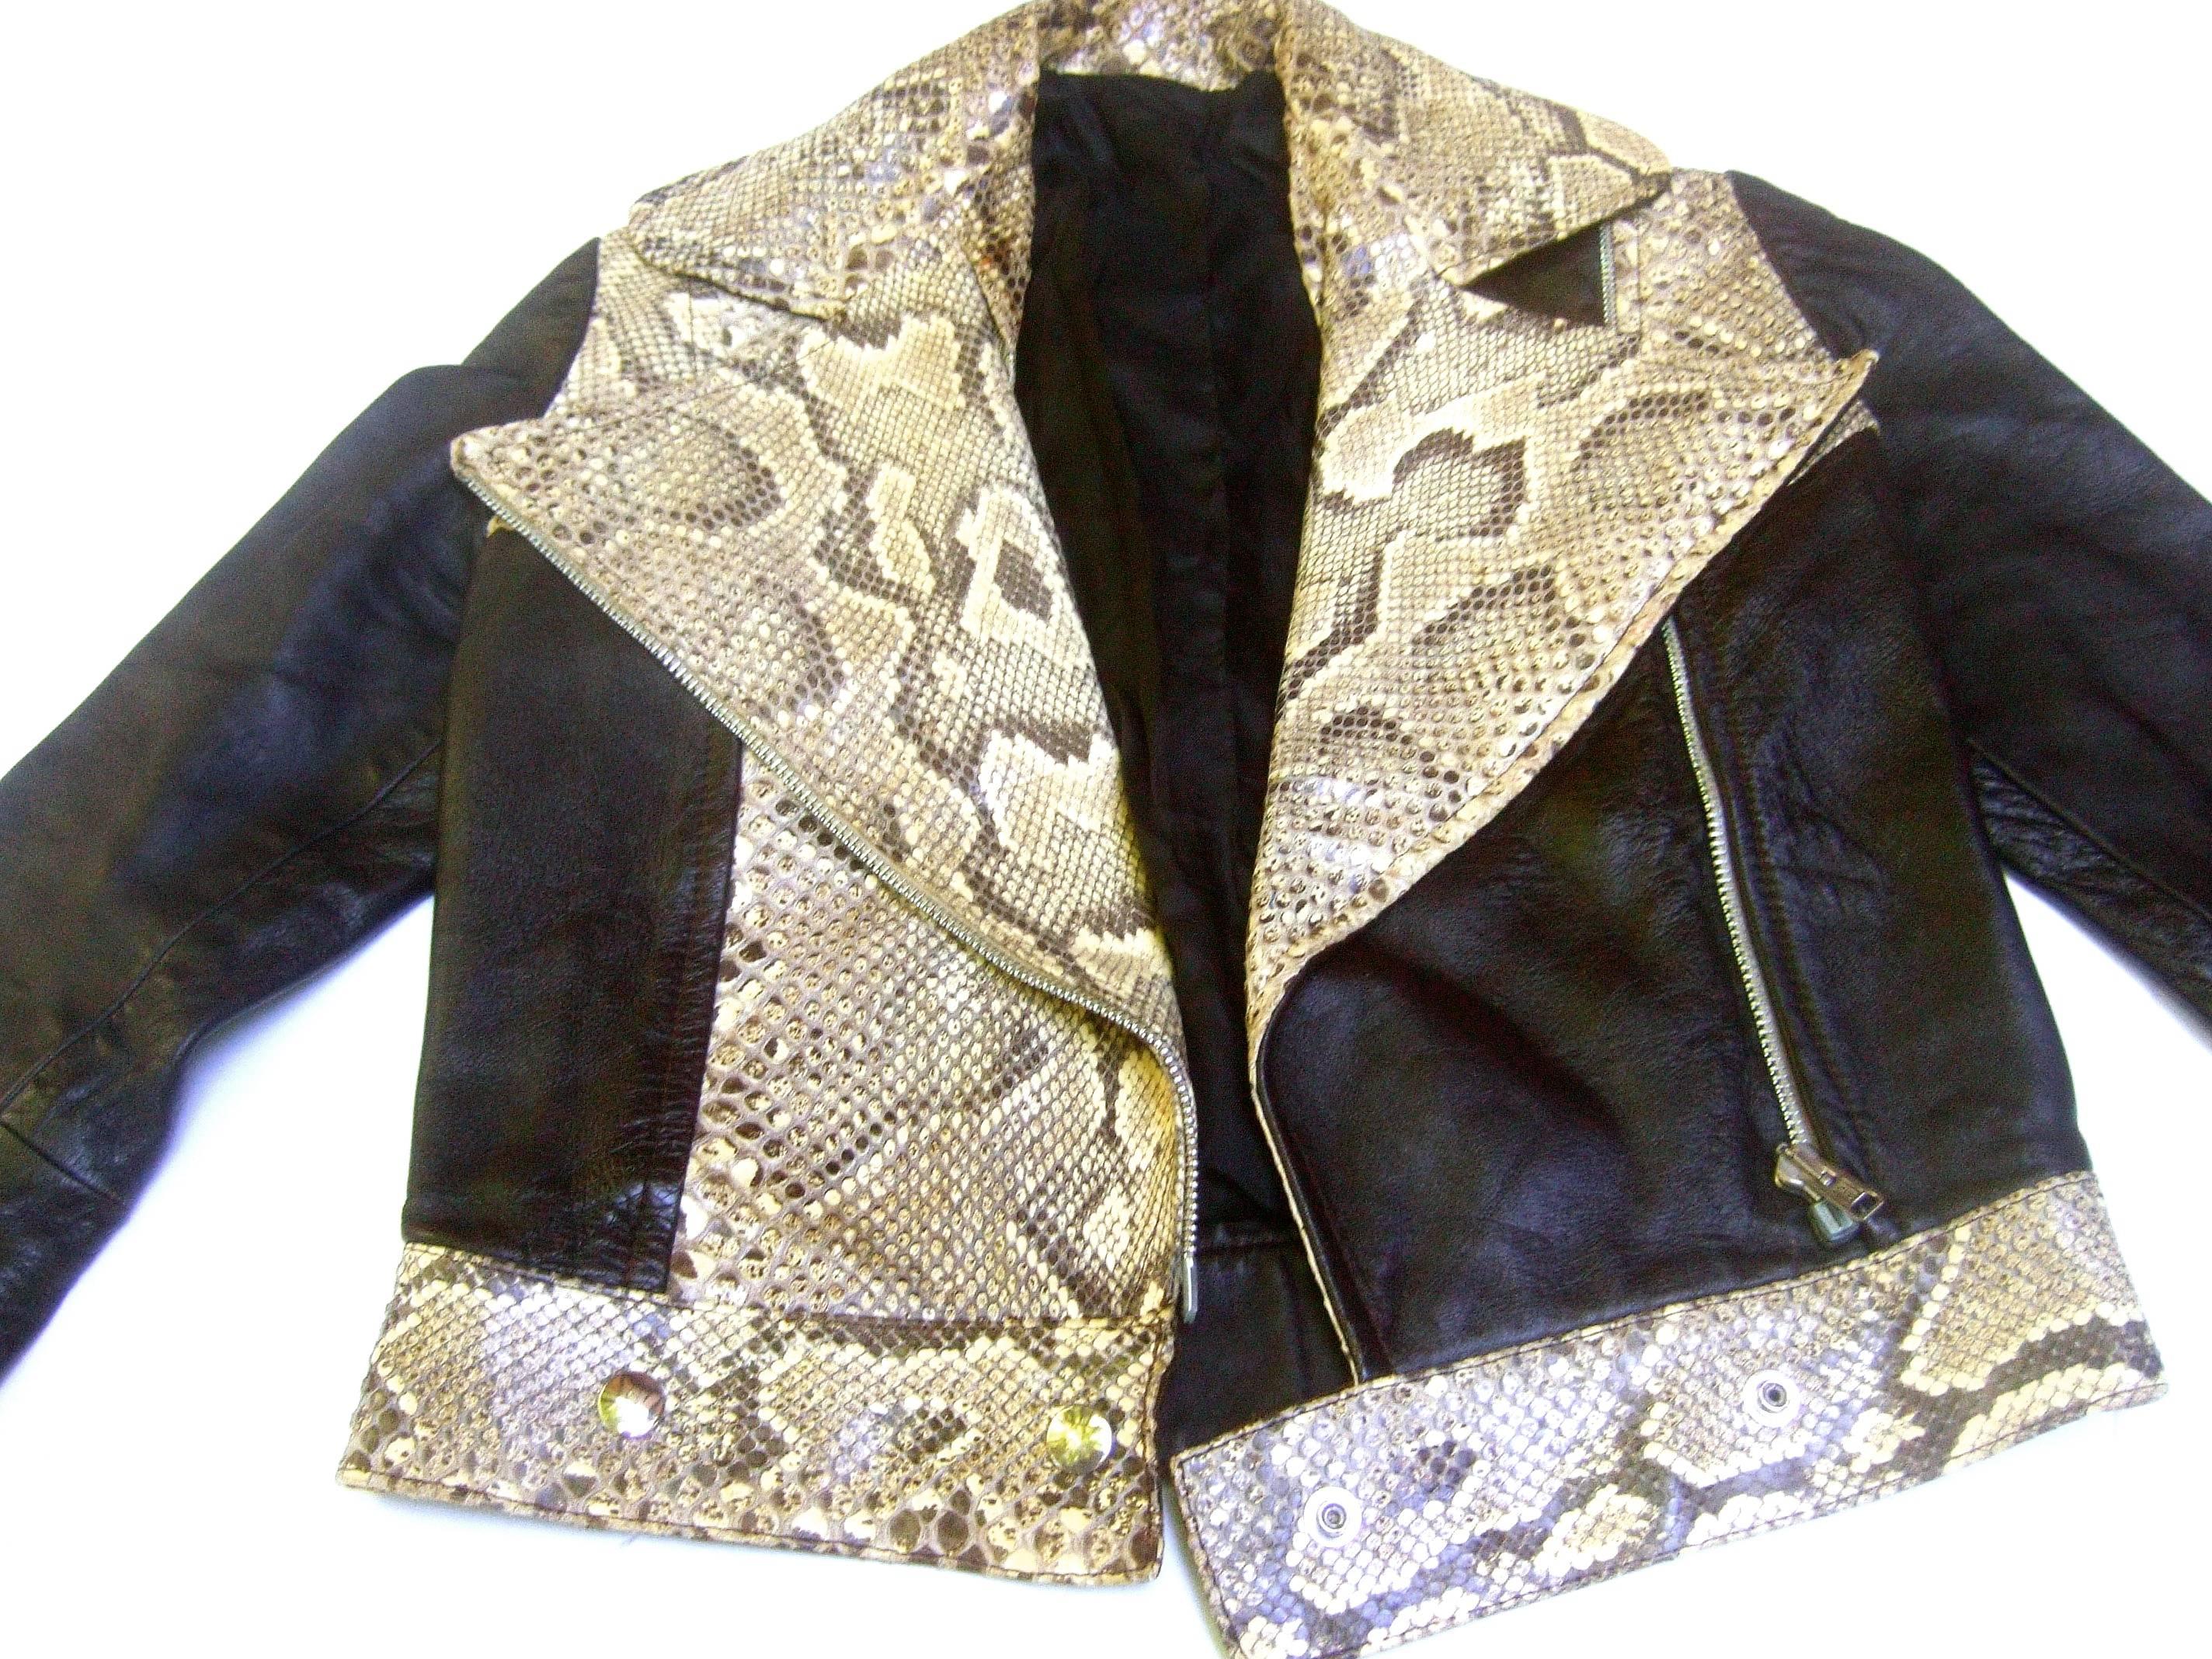 Black Ossie Clark Couture Brown Leather and Snakeskin Suit.  Unlabelled. Late 1960's.